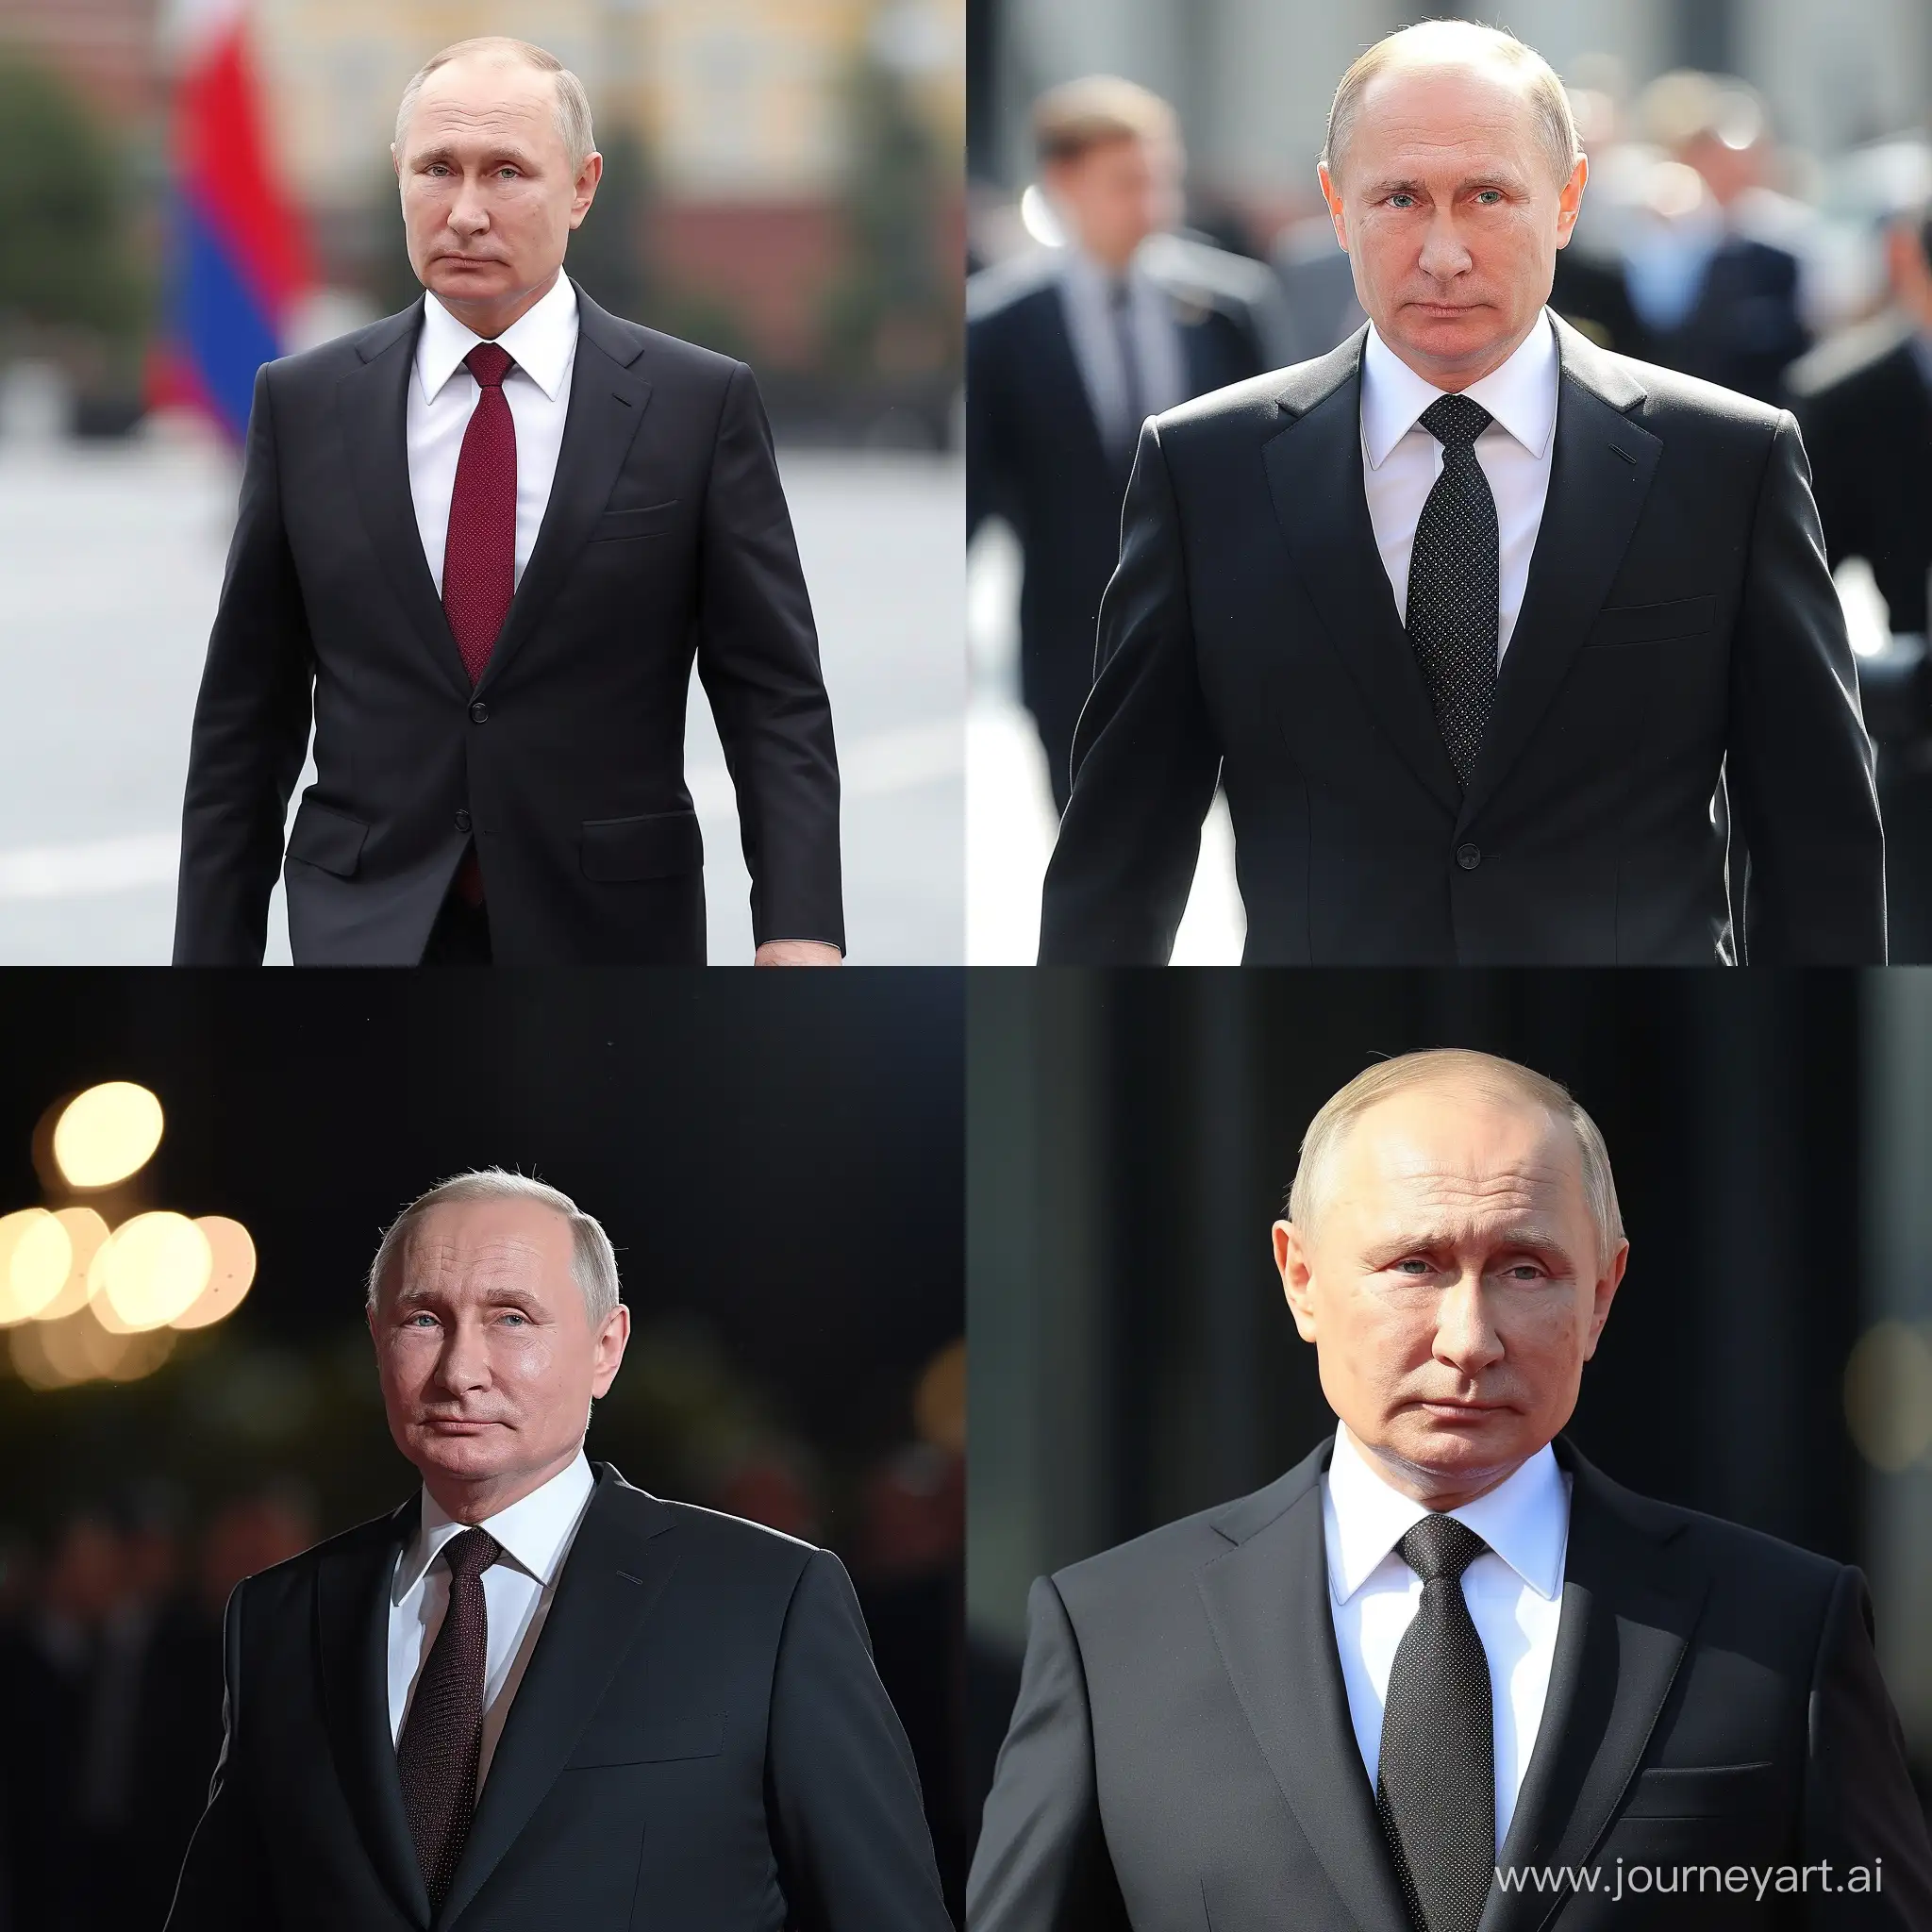 President-Putin-in-Moscow-Leaders-Stately-Presence-at-Official-Event